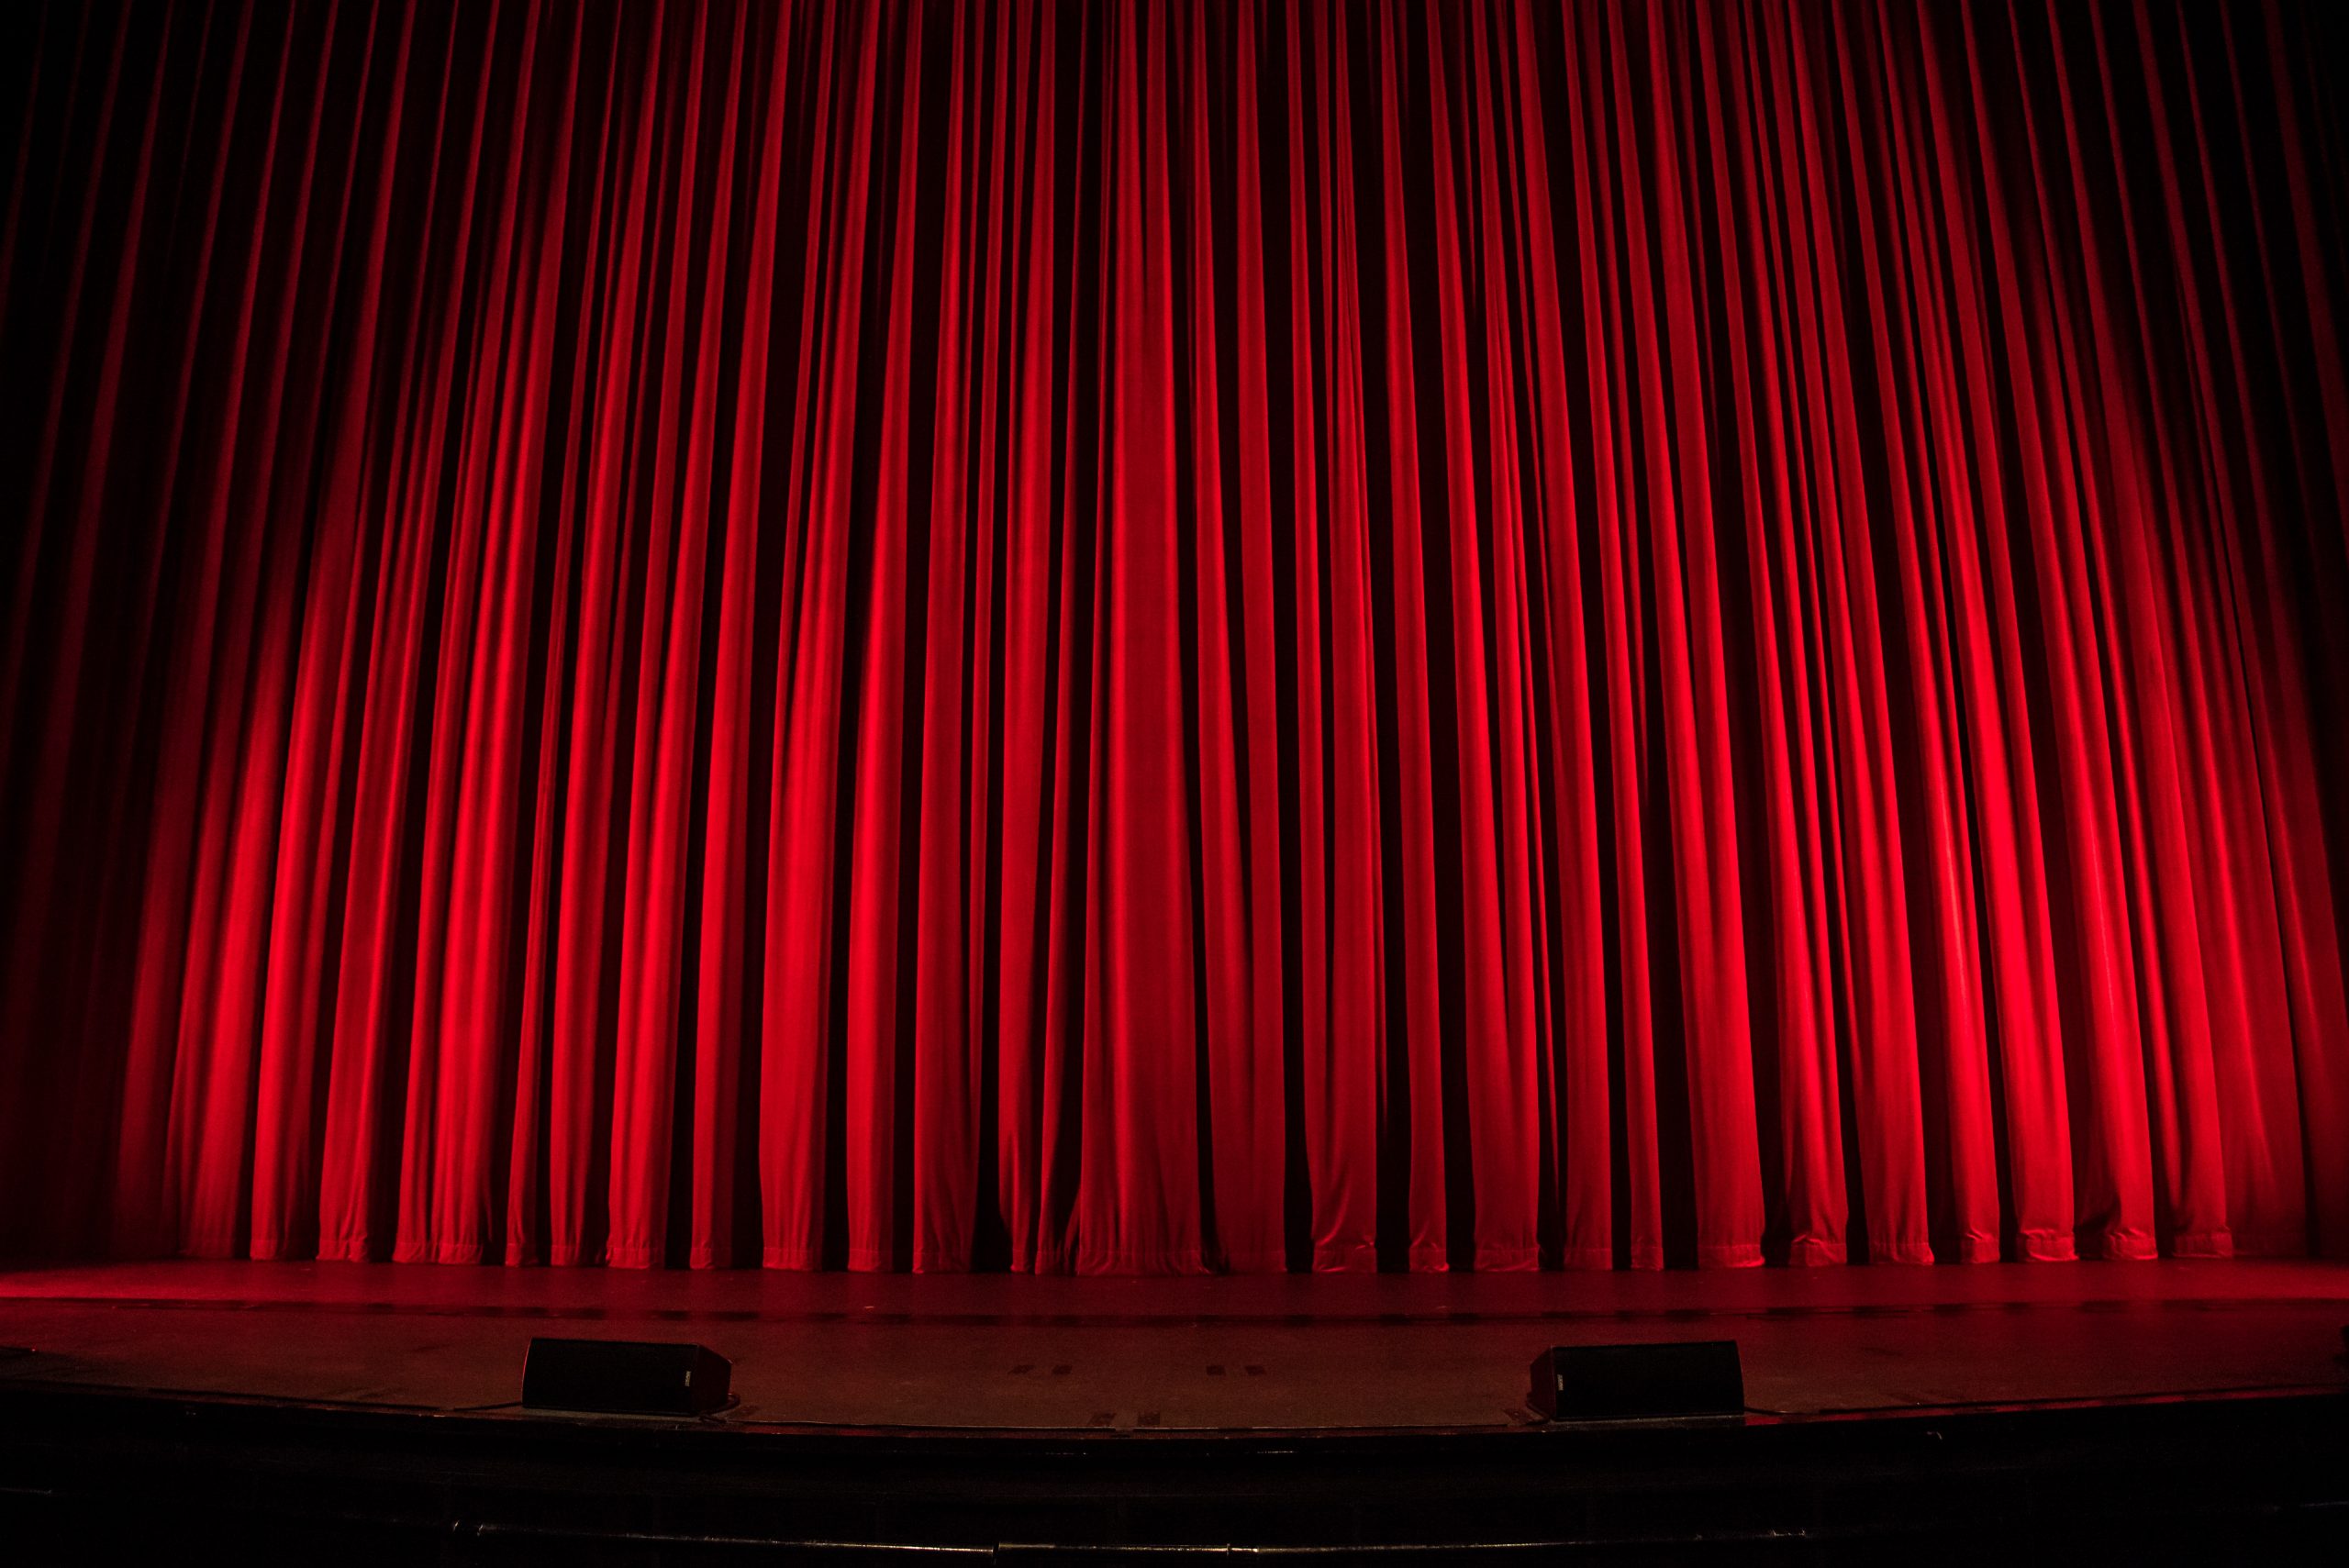 Theater Stage Curtains